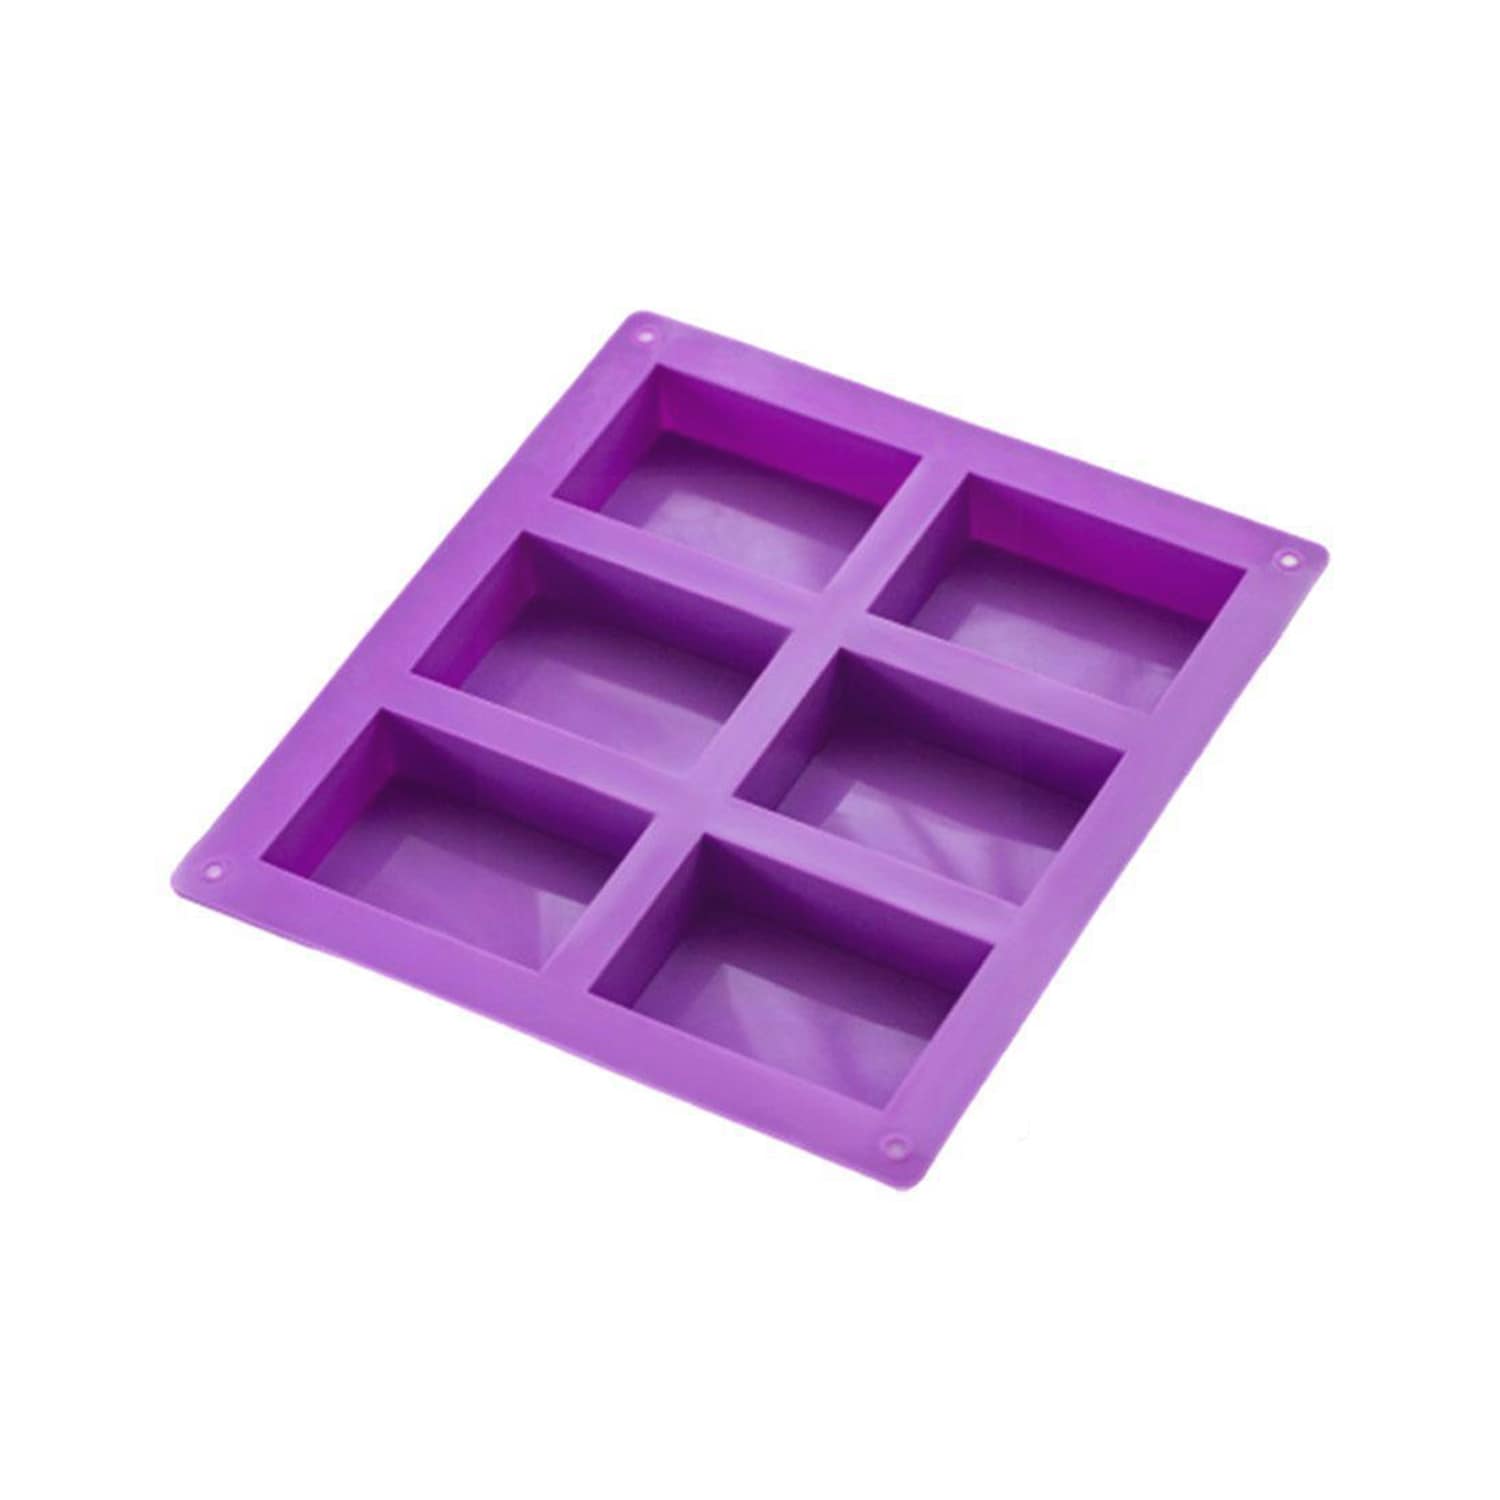 Rectangle Silicone Soap Mold, 6 Large Cavity DIY Molds Reusable